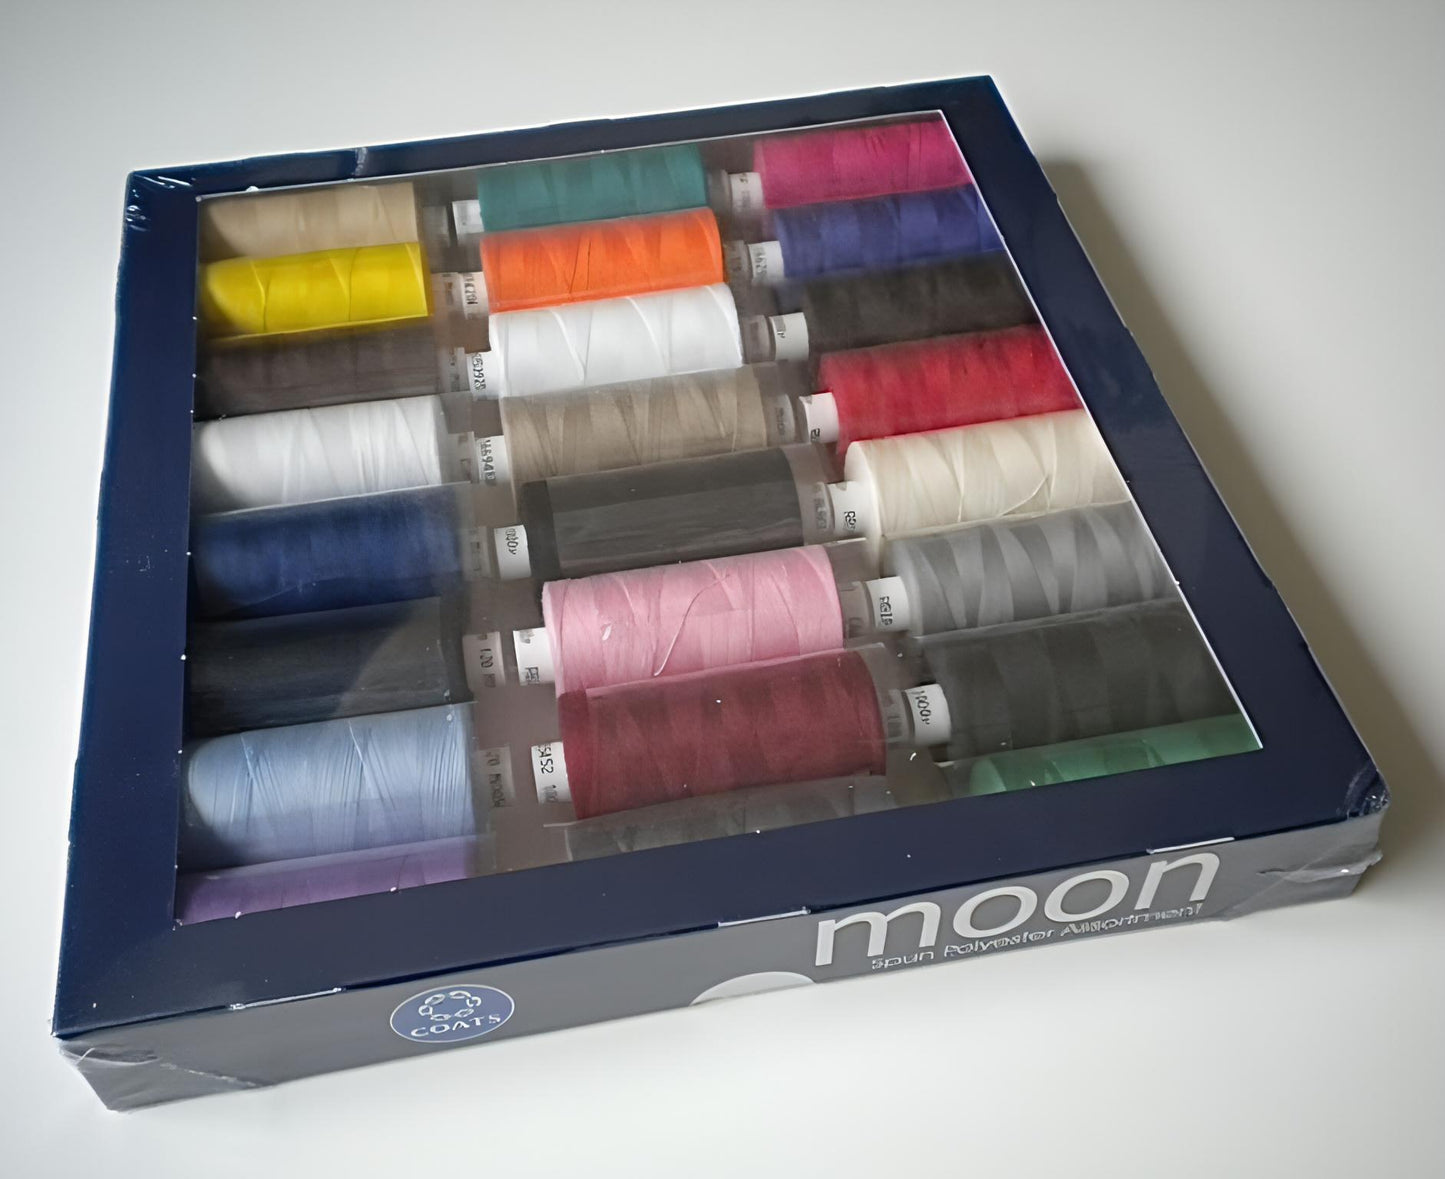 Coats Moon Thread - 24 x Extra large 1000y reels - Ideal for Sewing, Overlocking and Quilting